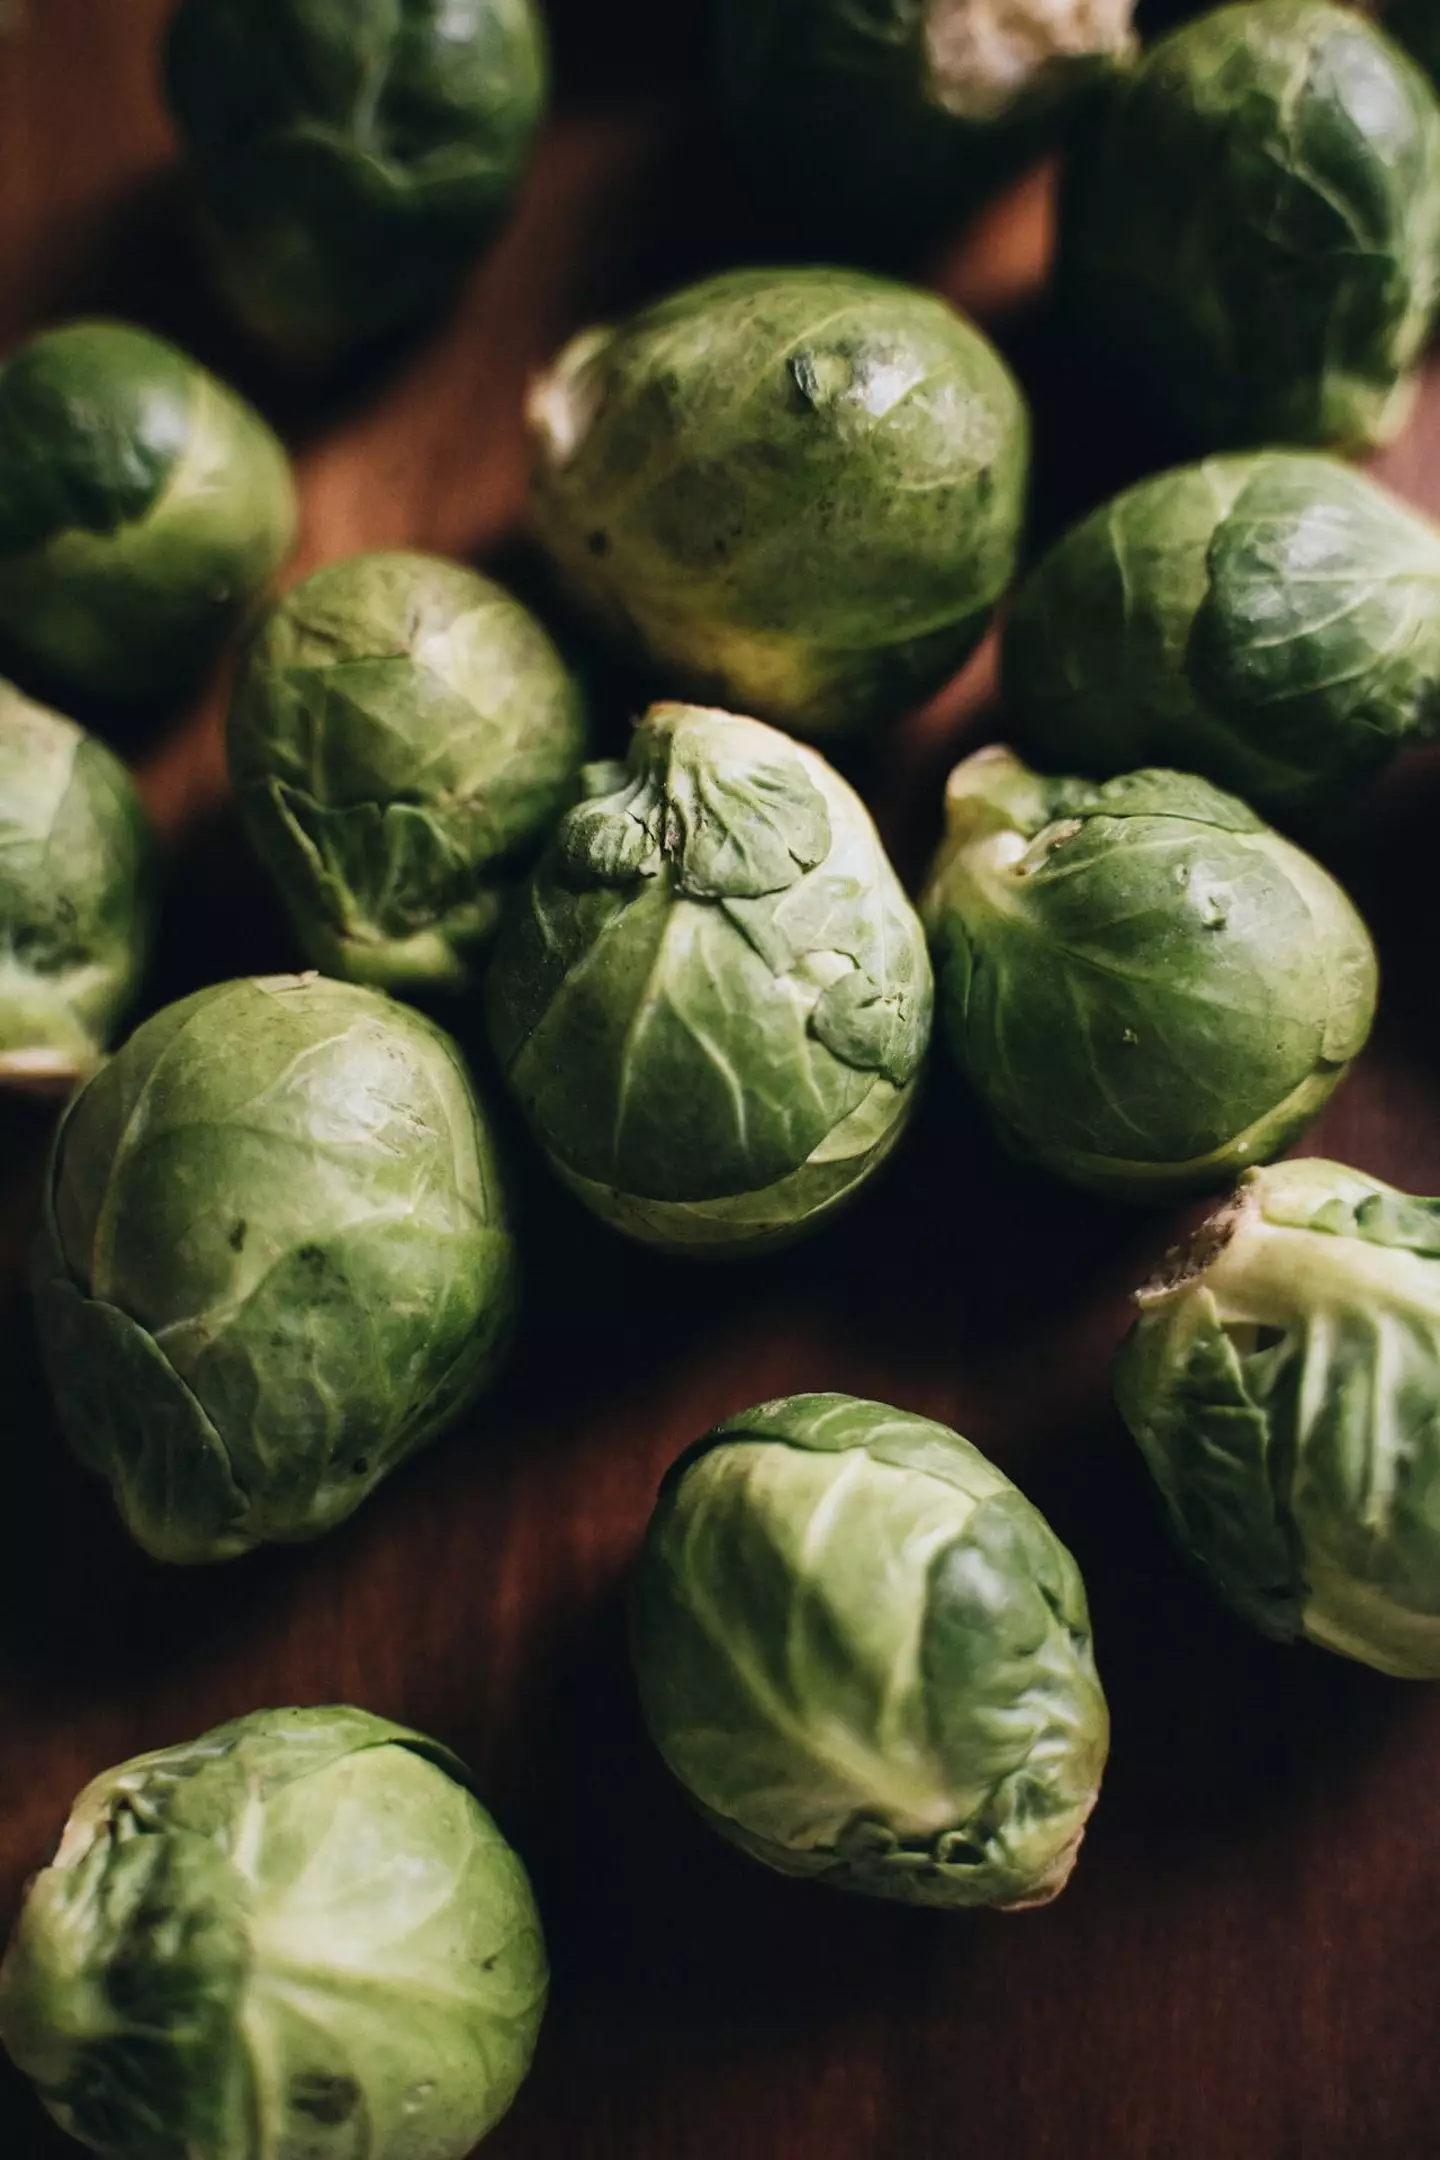 According to a 2011 study by Cornwall College, sprouts contain a chemical, similar to phenylthiocarbamide.